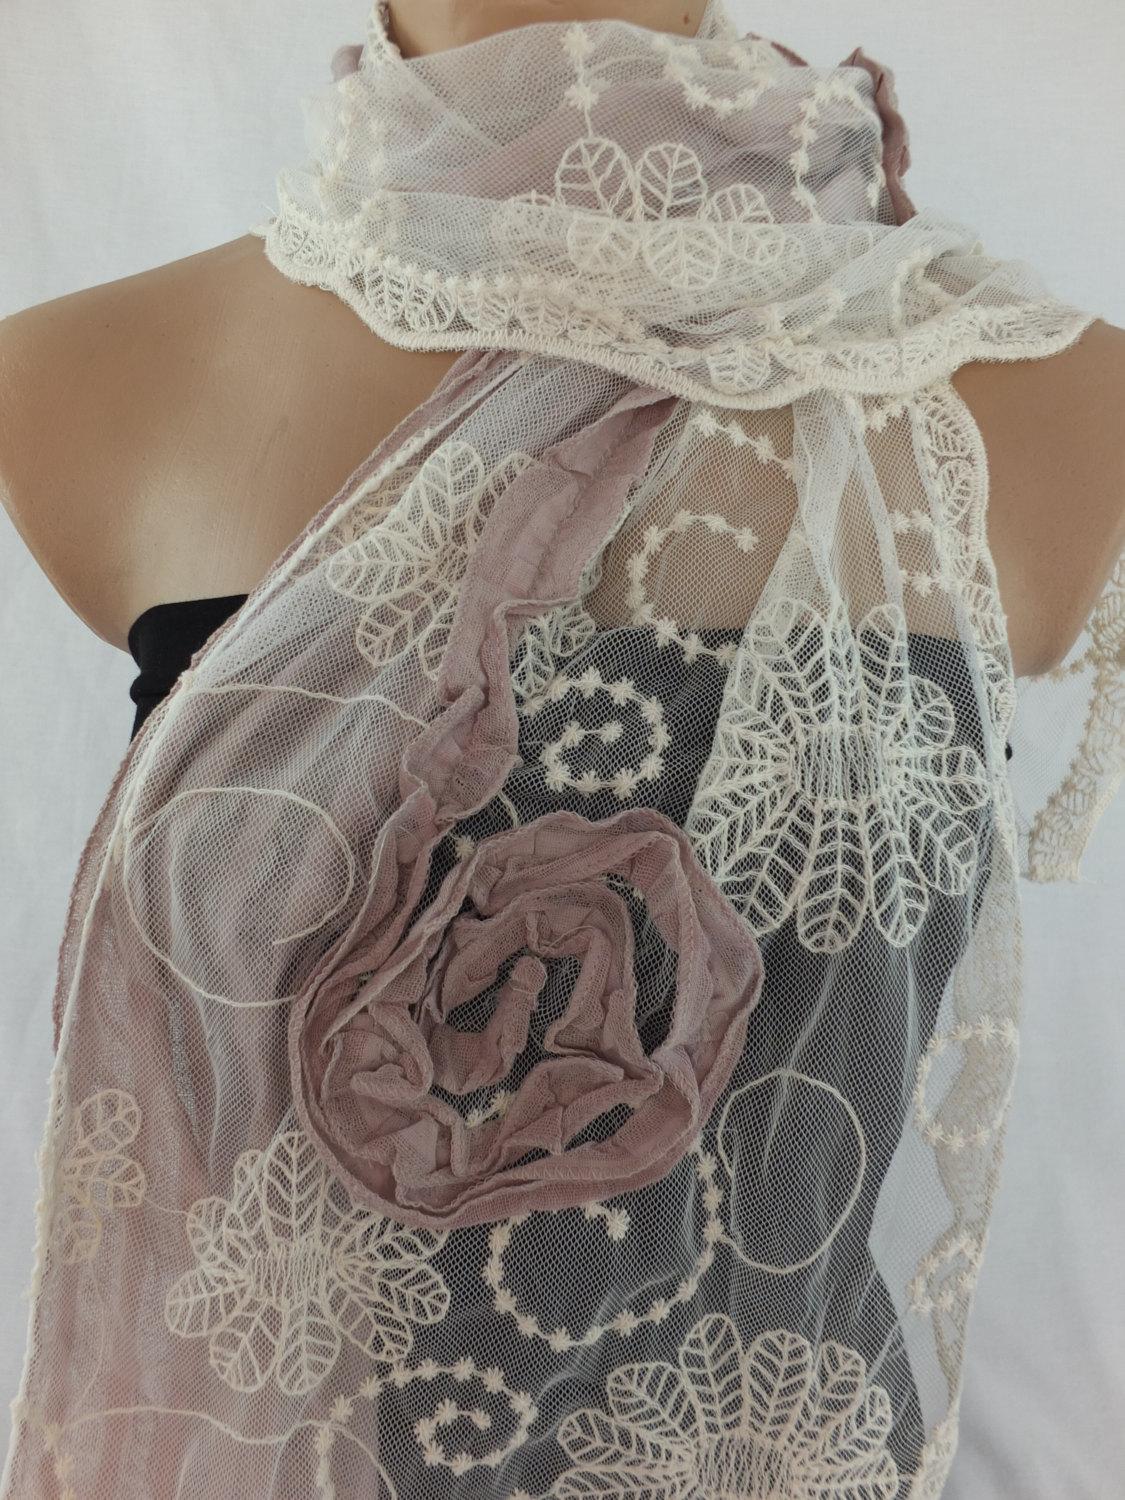 Woman Fashion Scarf , Tulle And Cotton Scarf, Dusty Pink And Cream Shawl, Long Scarf Shawl, Lace Cowl, Gift For Her